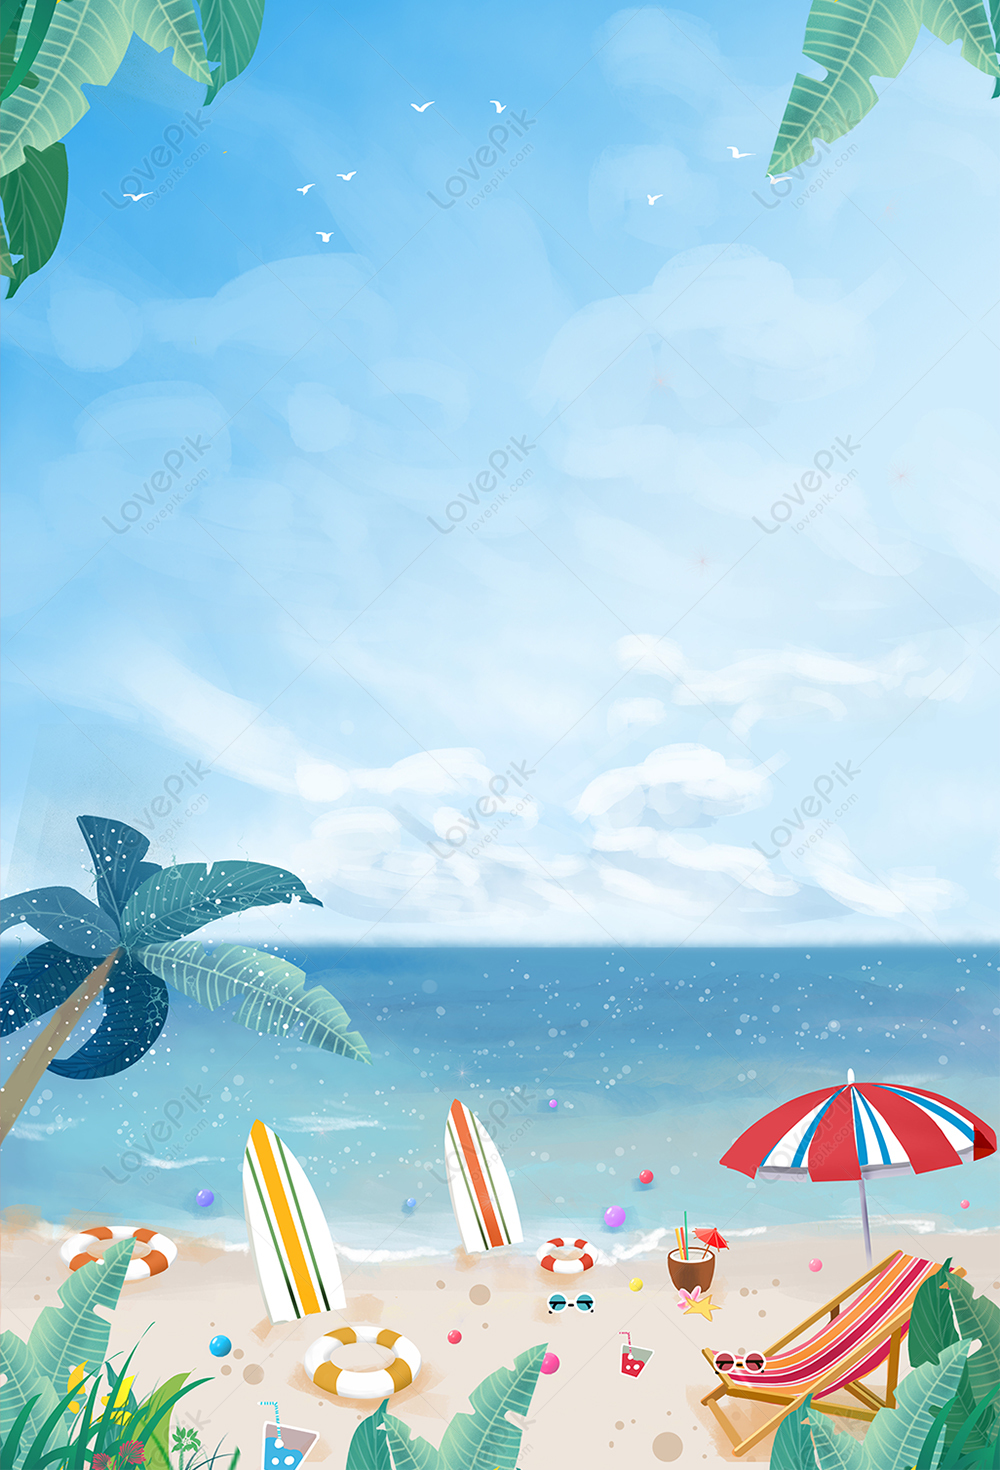 Cartoon Cool Summer Poster Background Download Free | Poster Background  Image on Lovepik | 401573619